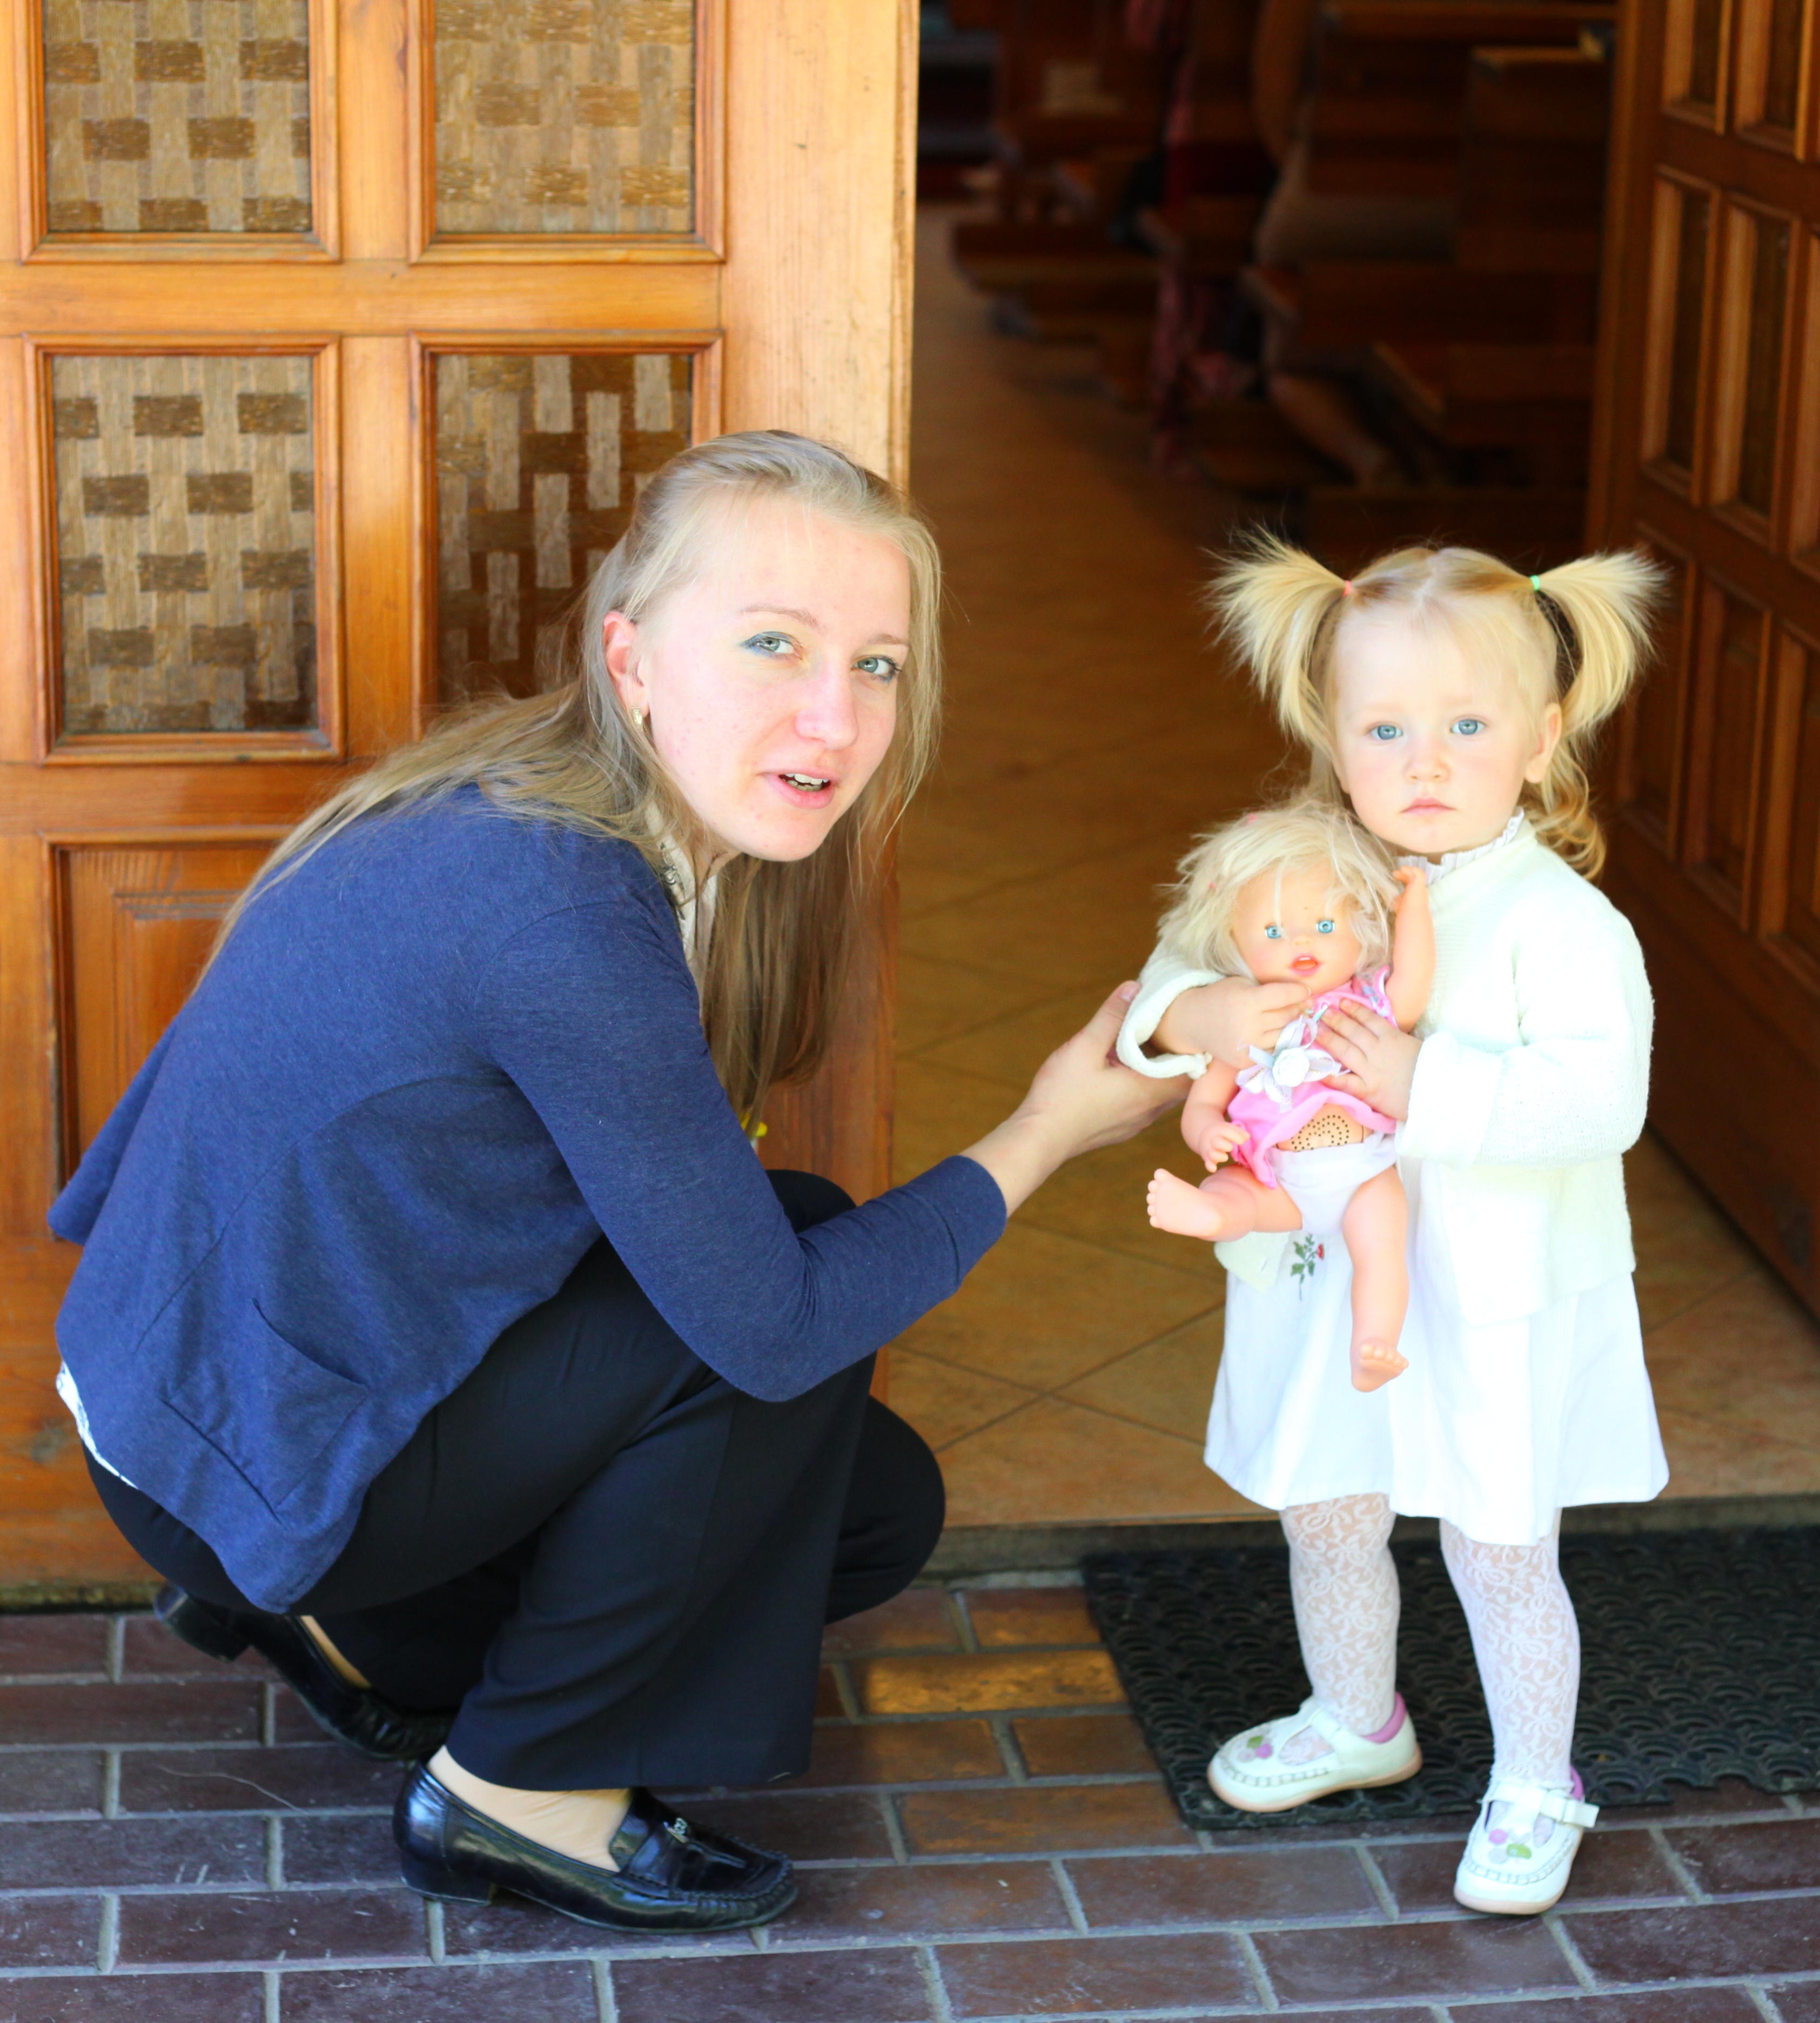 A young blond Catholic mother with her baby daughter